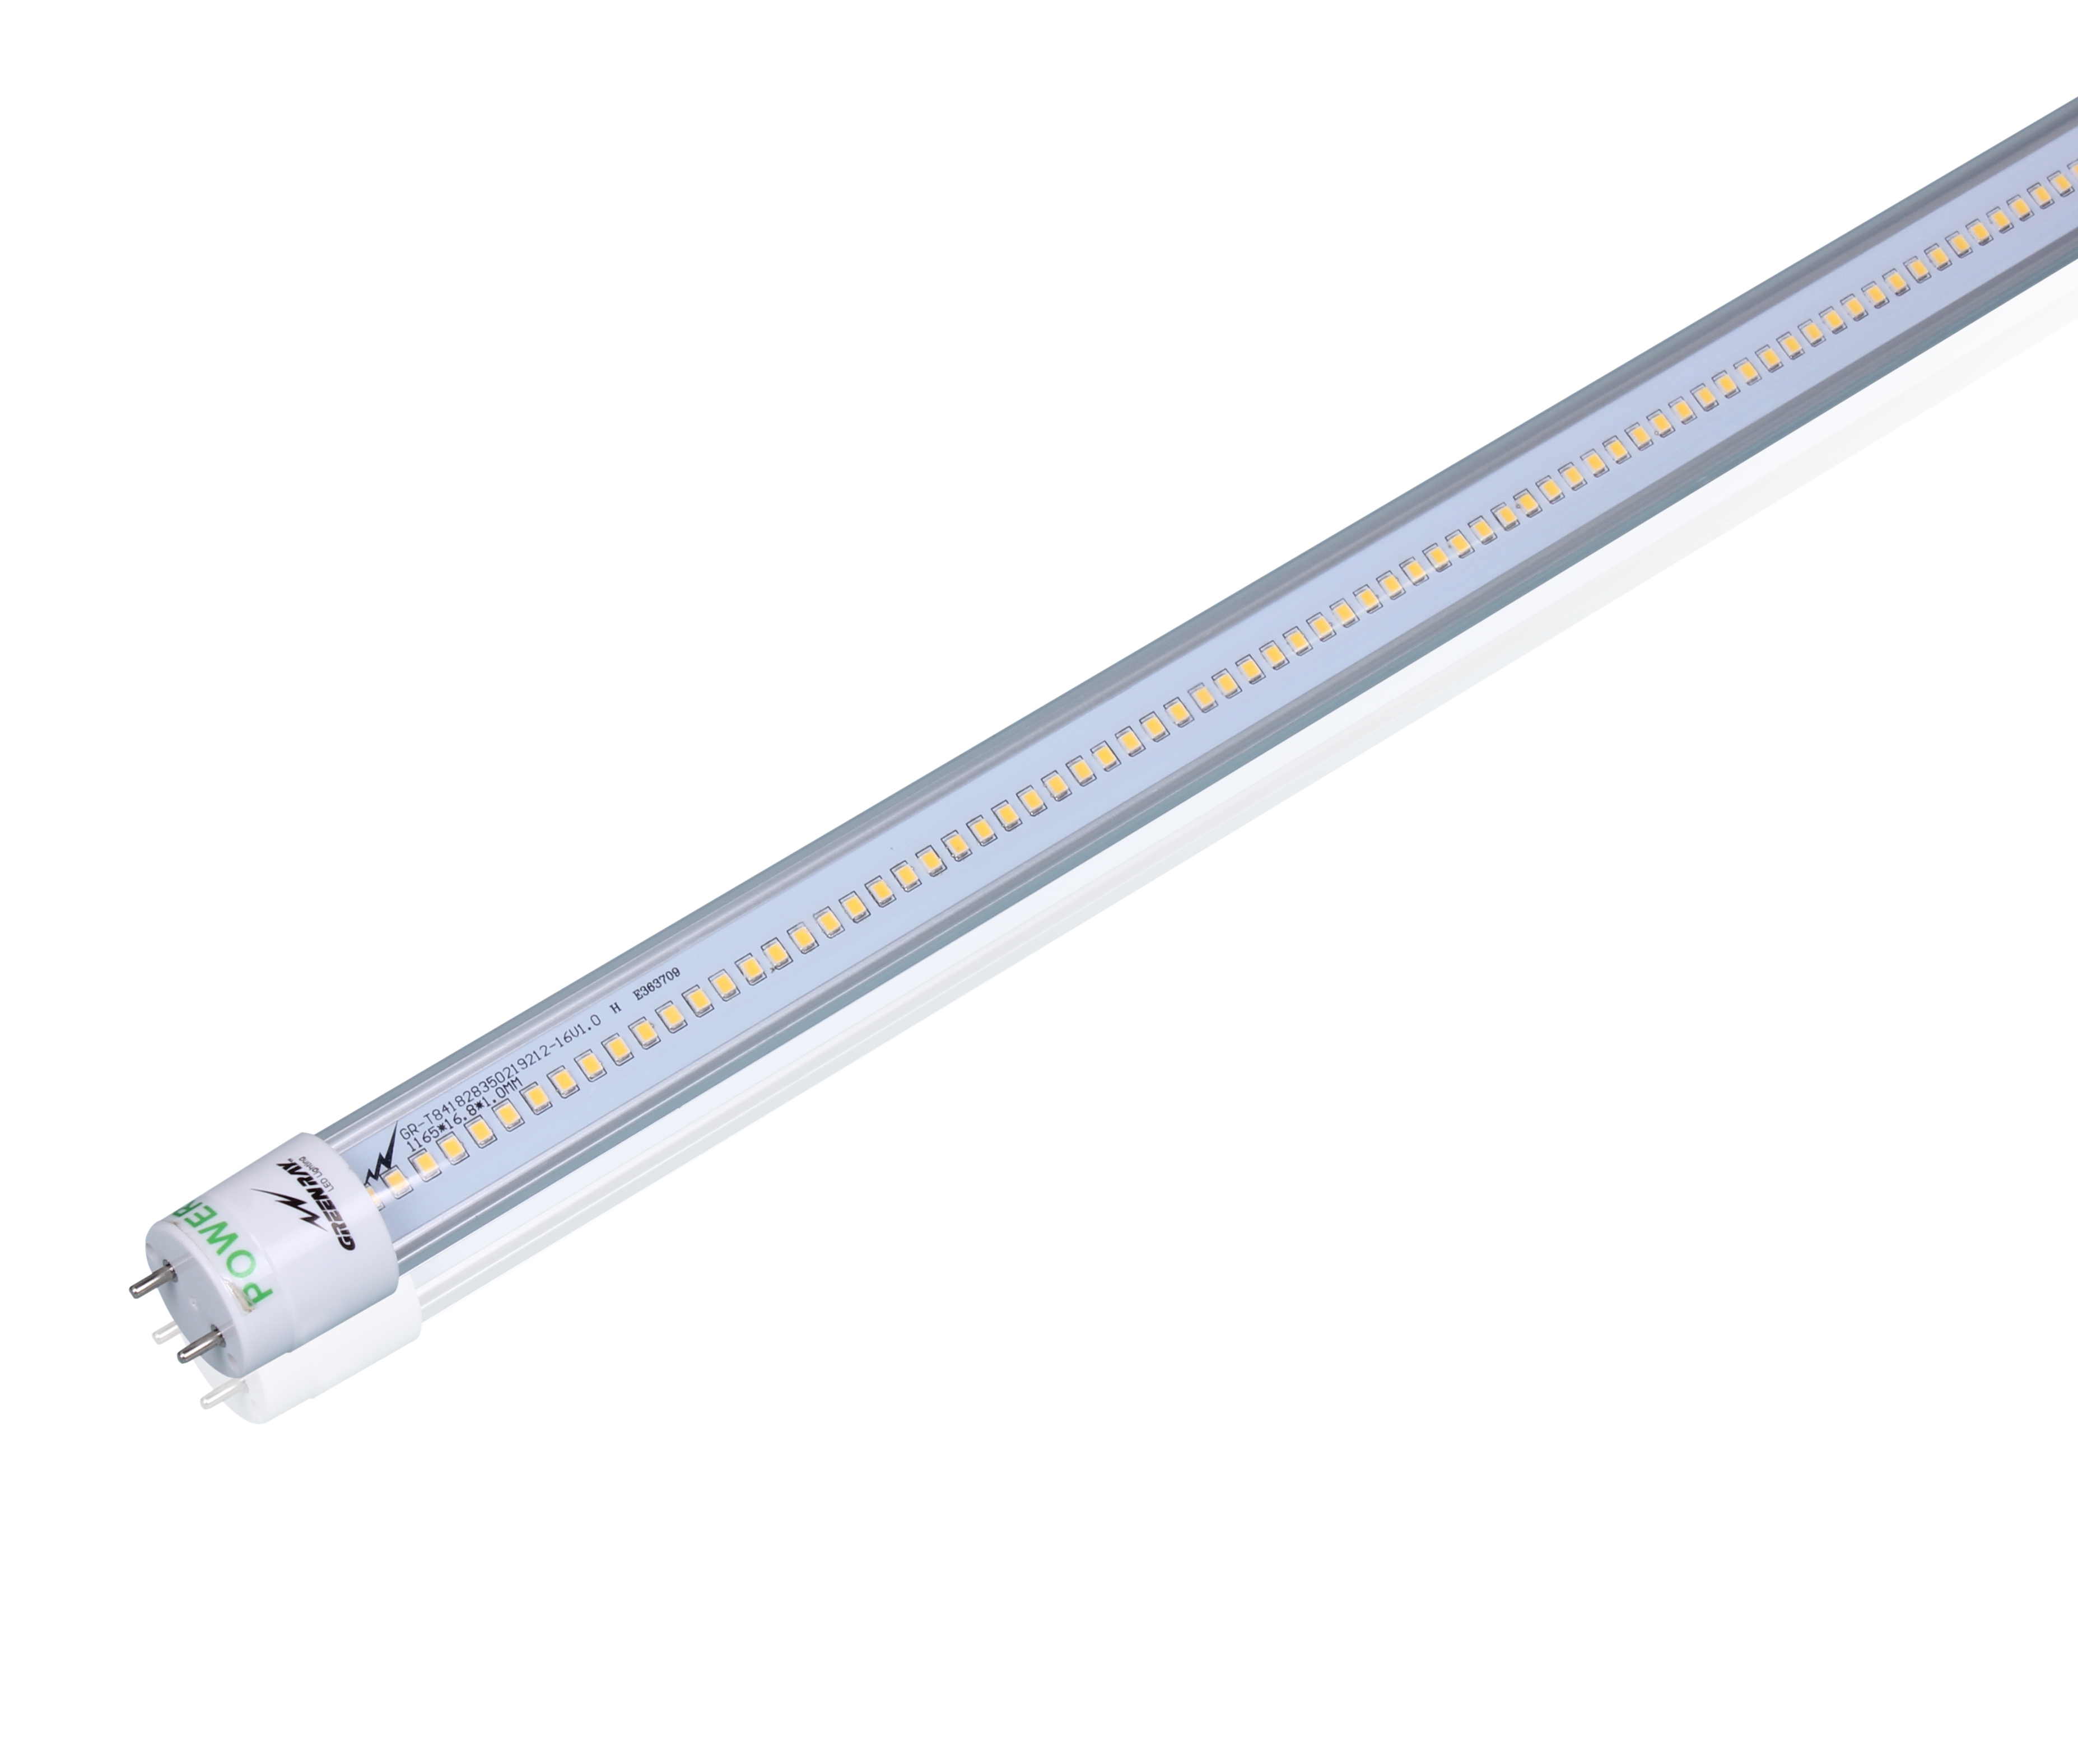 T8 LED tube, 1200mm, 18W, 80Ra 120lm/W, CE\RoHS\UL certificated, 5 years warranty, SMD 2835